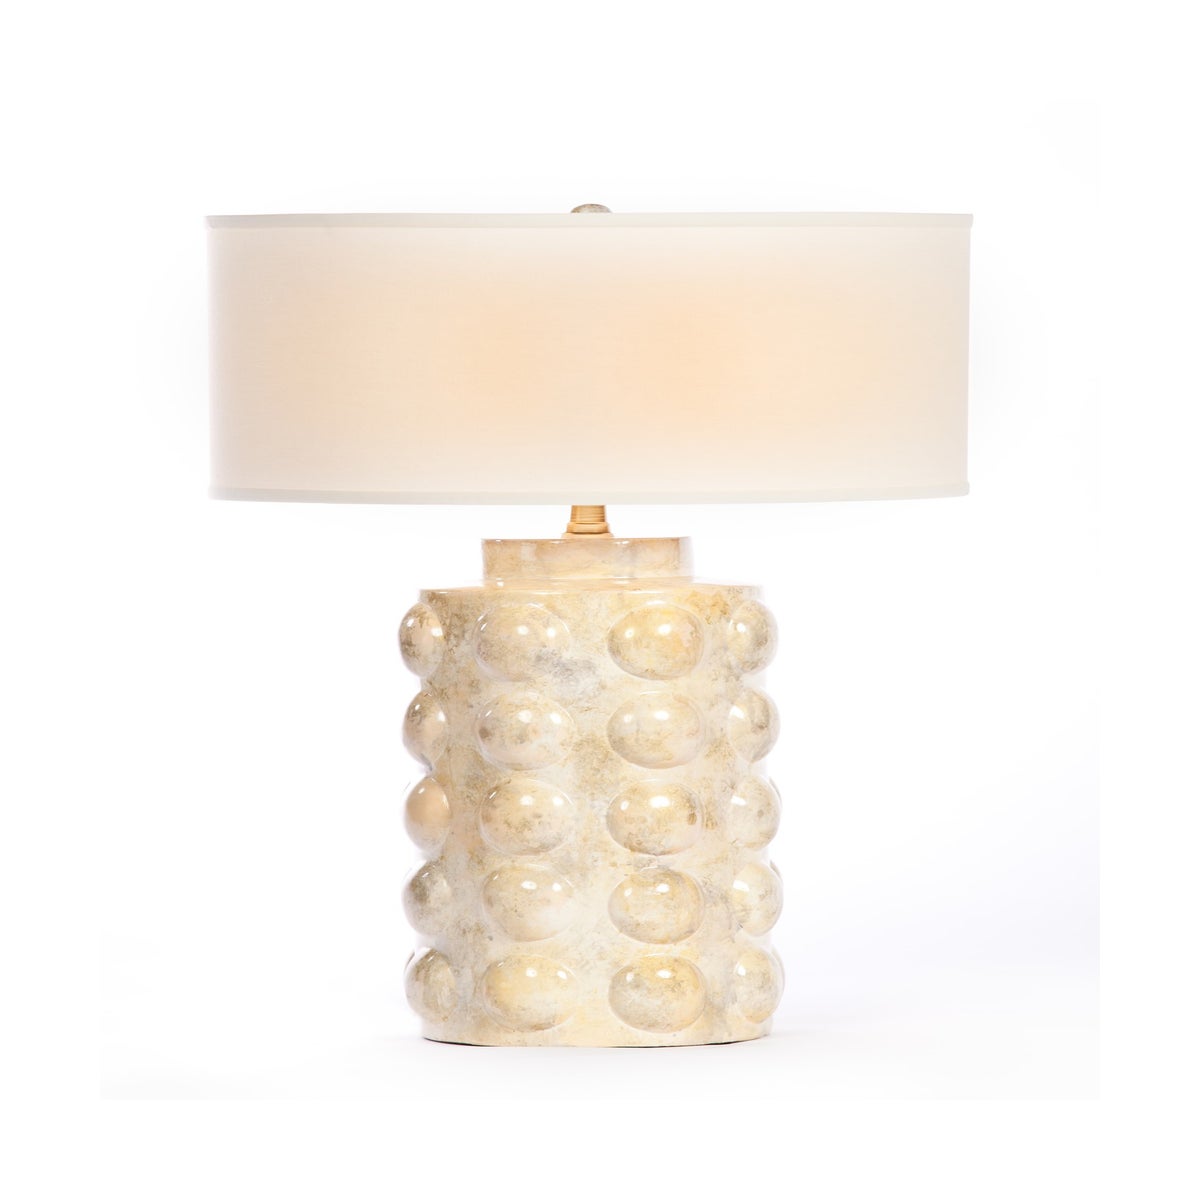 Zoey Table Lamp In Candle Wax Finish With White White 18 Drum Shade Table Lamps Prima Design Source